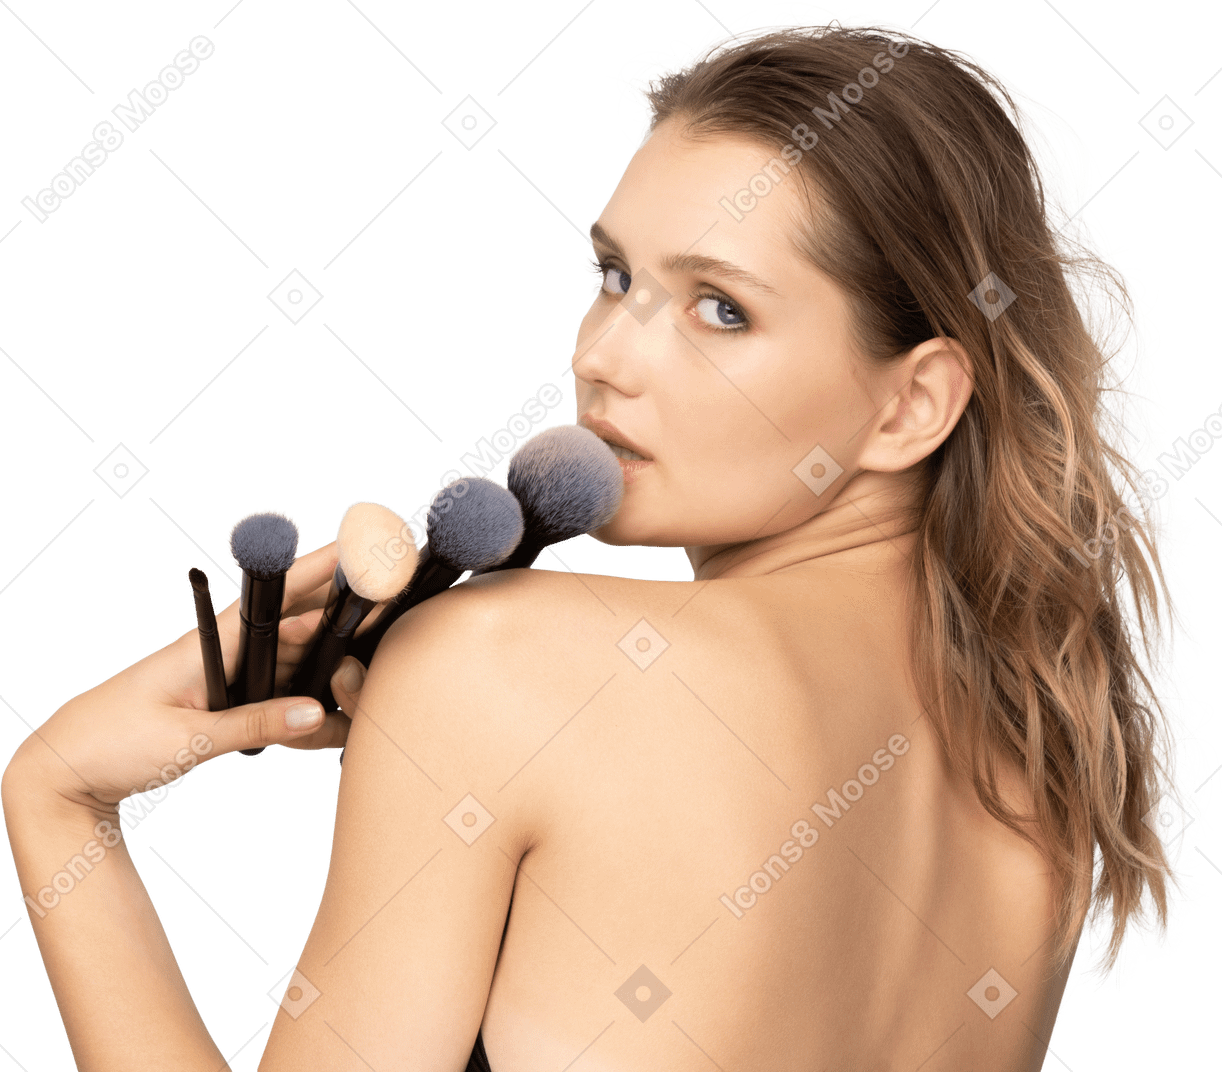 Back view of a sensual young woman holding make-up brushes